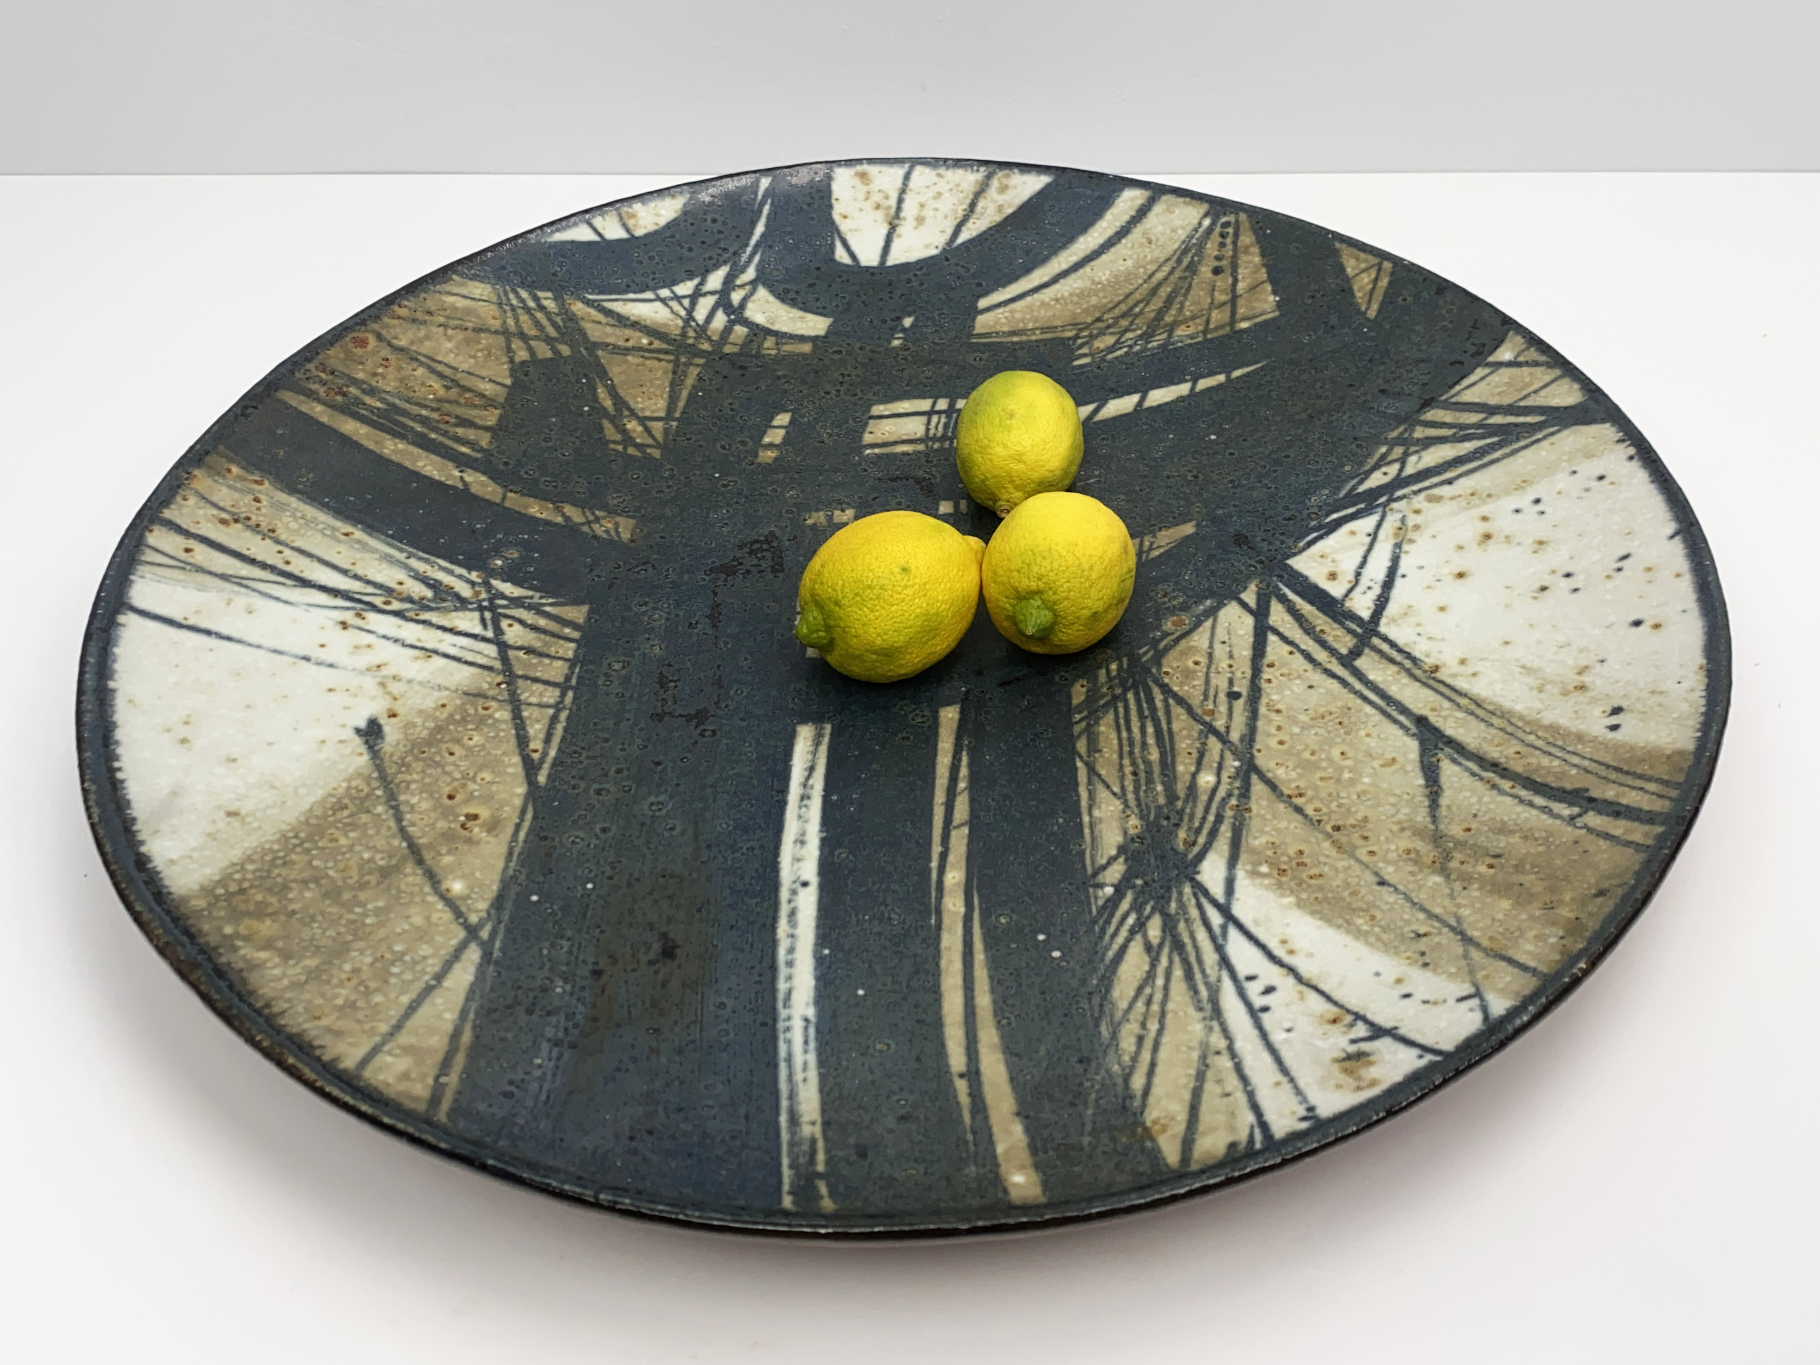 Large Bowl, Wall Plate, Ceramic, Stoneware, Unique Piece, abstract Composition, Painting on white mat Glaze, by Wilhelm & Elly Kuch, 1972